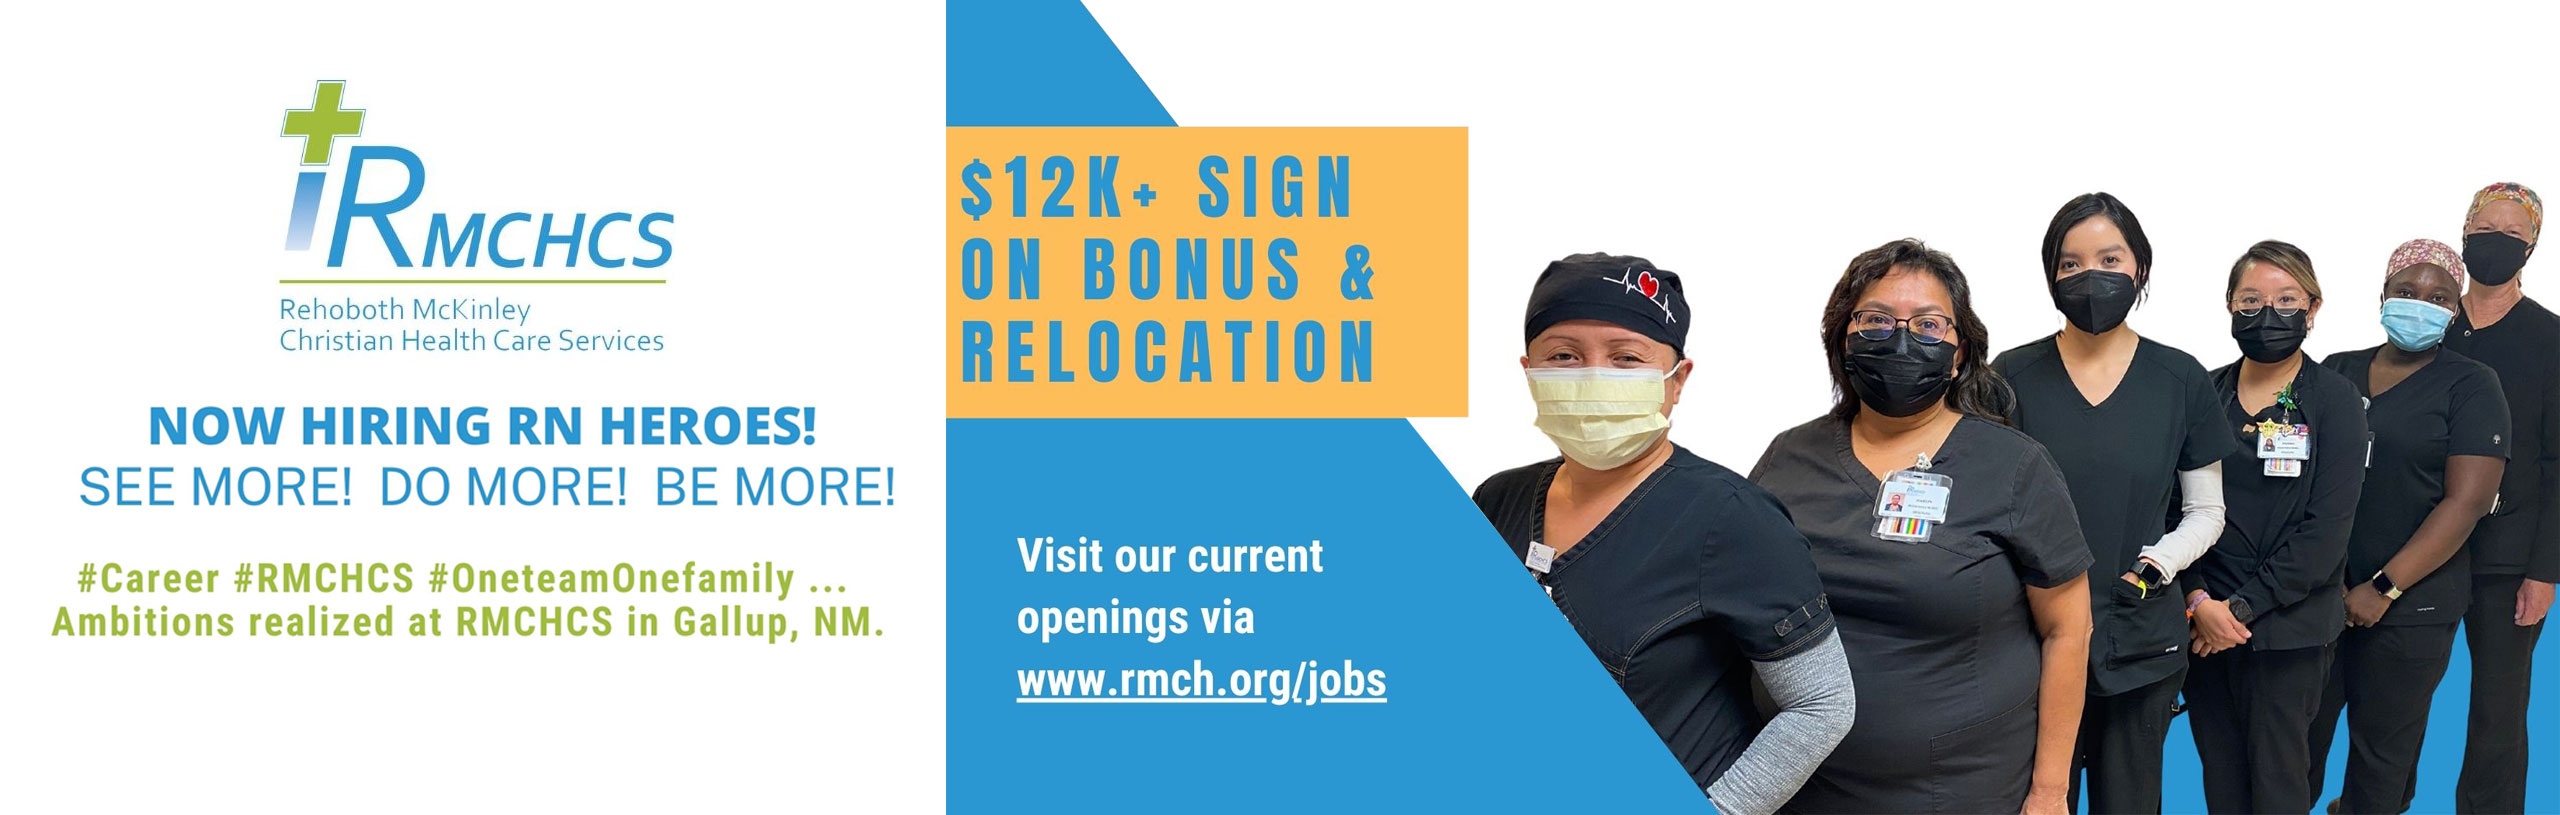 Banner picture of six female Nurses standing in a line smiling while wearing mask. Banner says:

NOW HIRING RN HEROES!
SEE MORE! DO MORE! BE MORE!

#Career #RMCHCS #Oneteamfamily ...
Ambitions realized at RMCHCS in Gallup, NM.

$12K + SIGN ON BONUS & RELOCATION

Visit our current openings via www.rmch.org/jobs

Call Brian Lalio at (505) 863-7189 or e-mail blalio@rmchcs.org